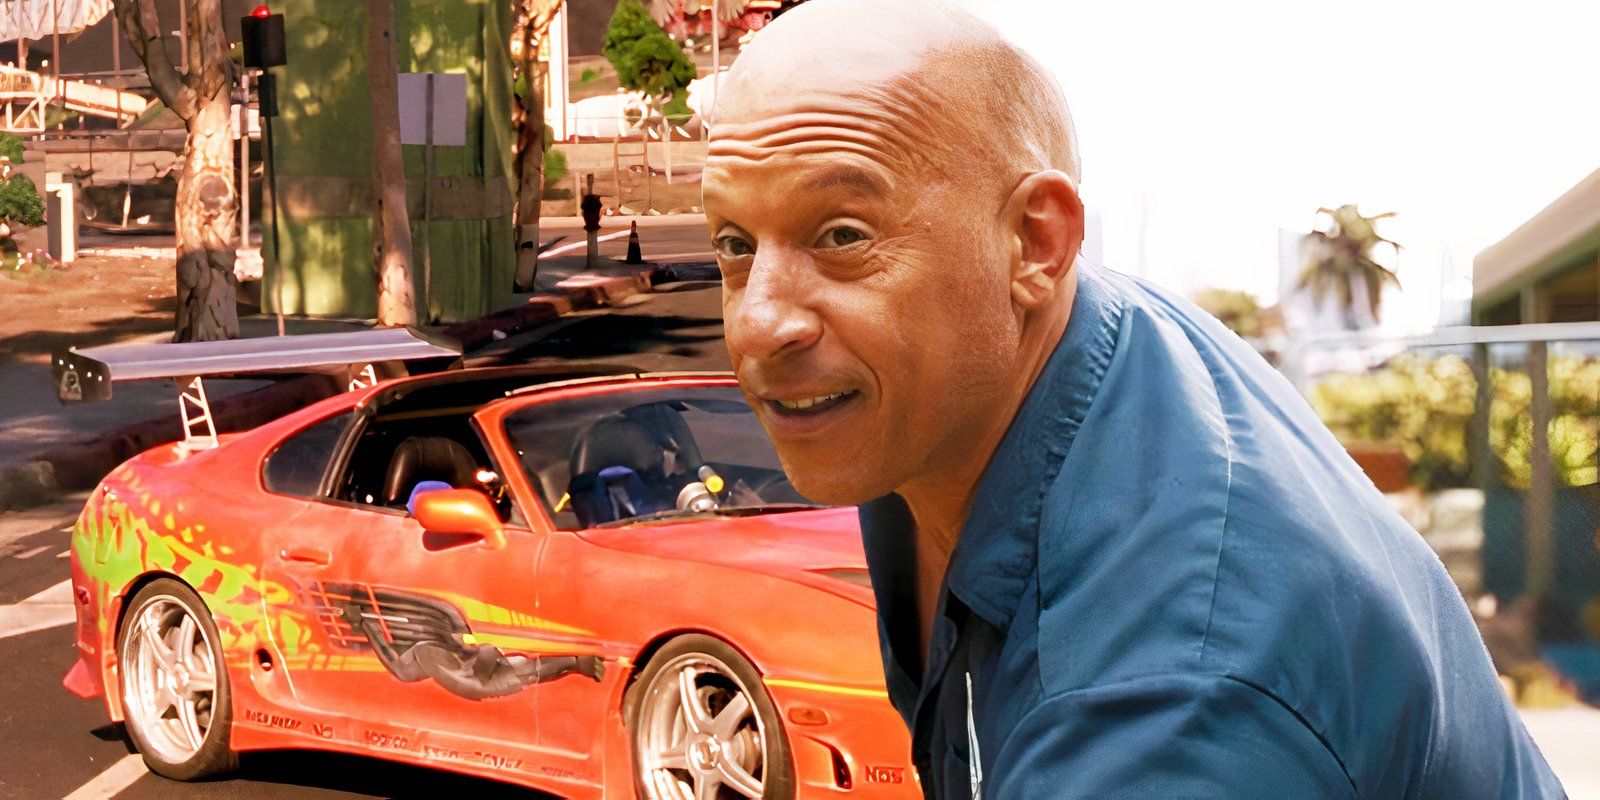 Vin Diesel as Dom in Fast X juxtaposed with Brian's orange Toyota Supra from The Fast and the Furious